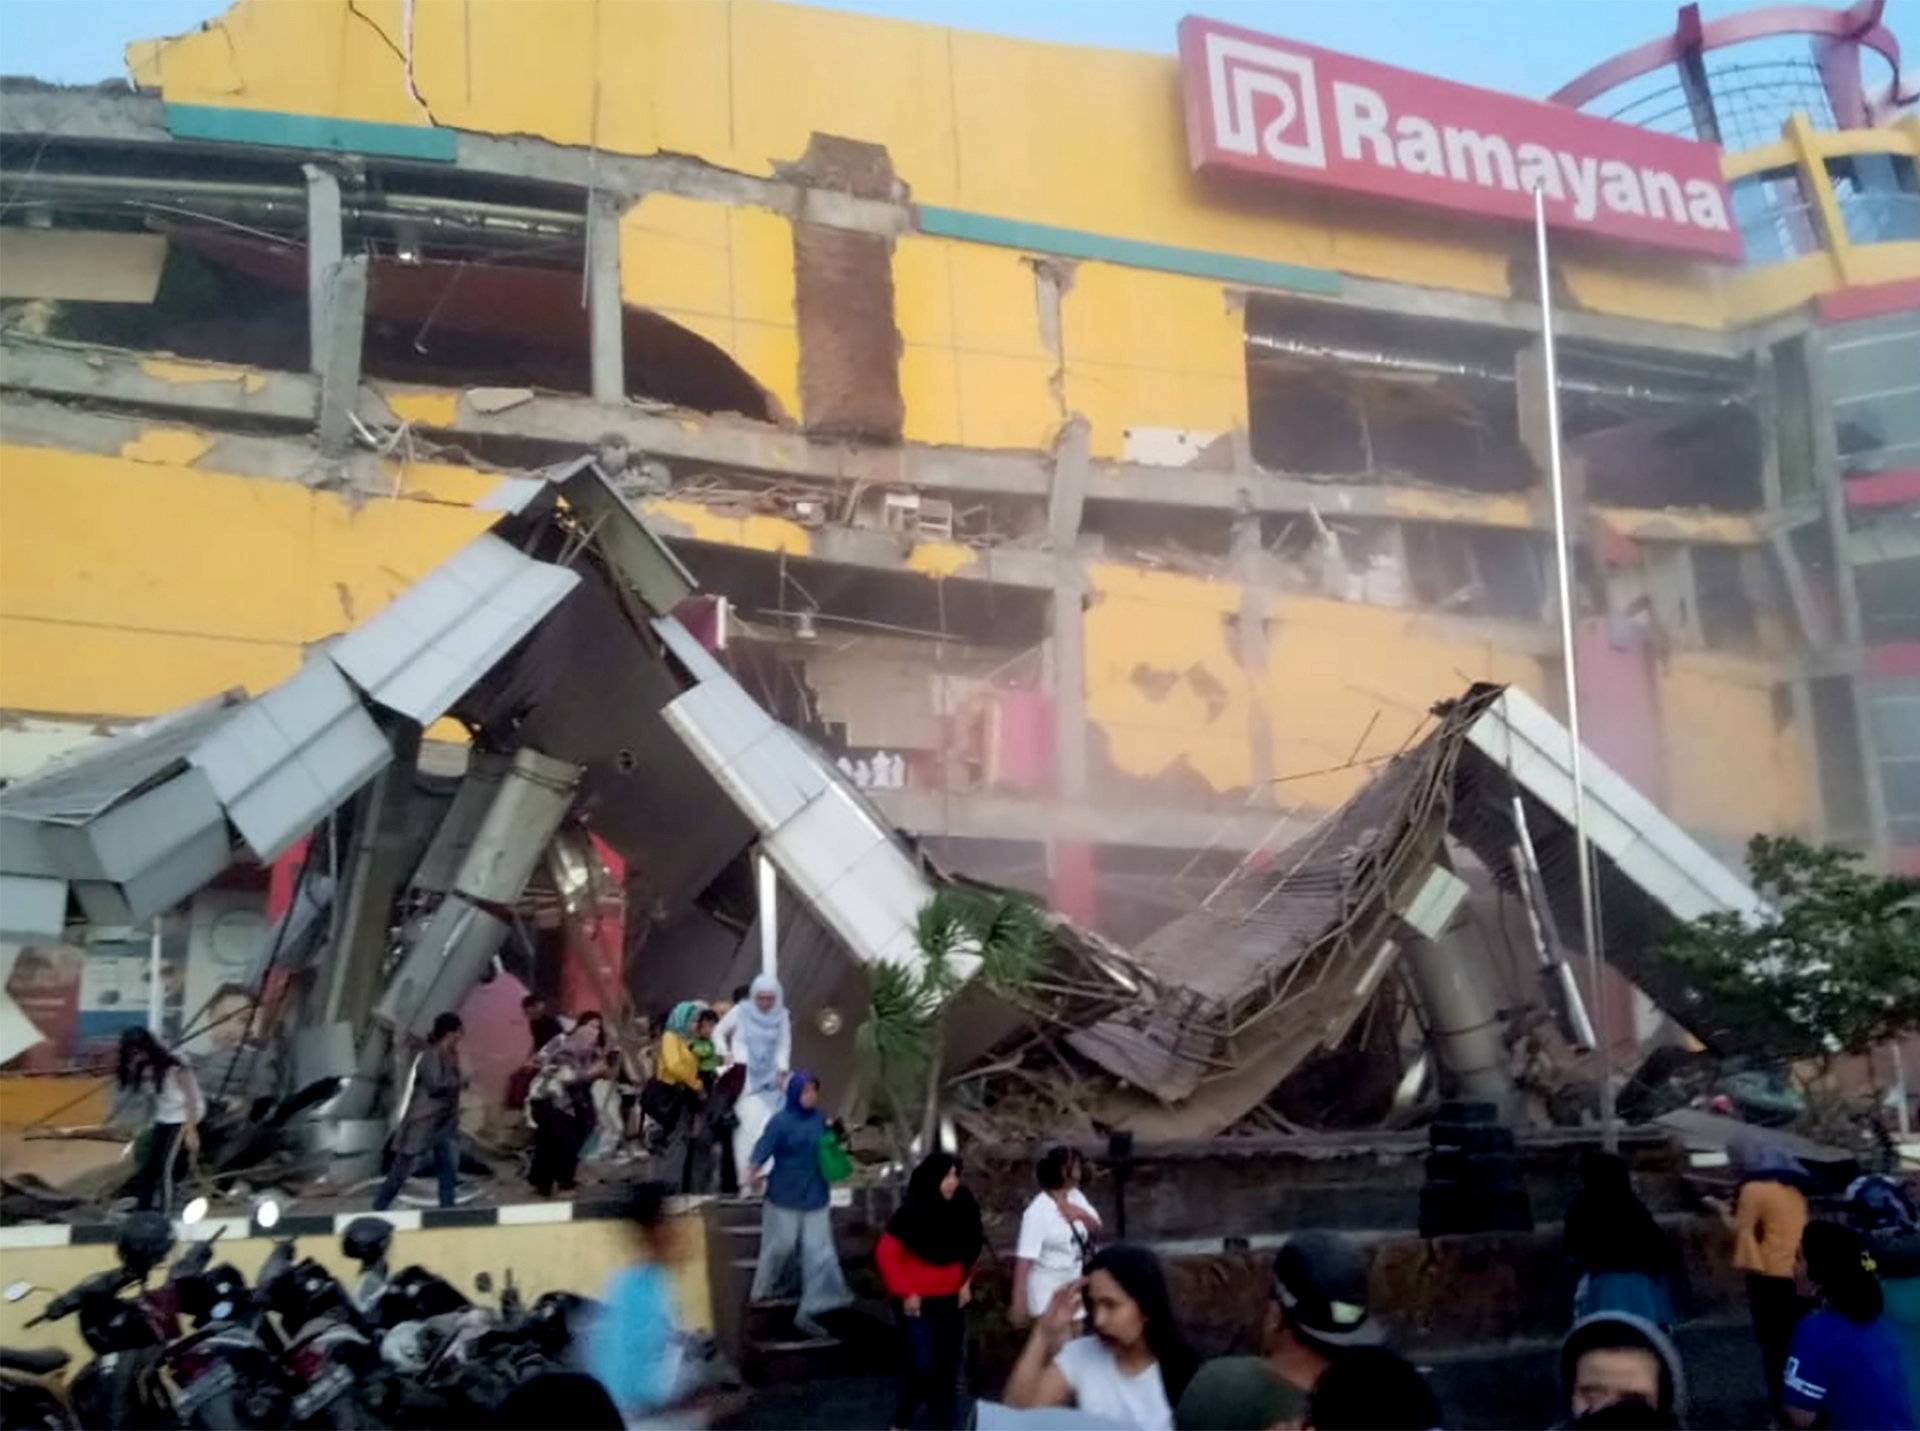 A shopping center heavily damaged following an earthquake in Palu, Central Sulawesi